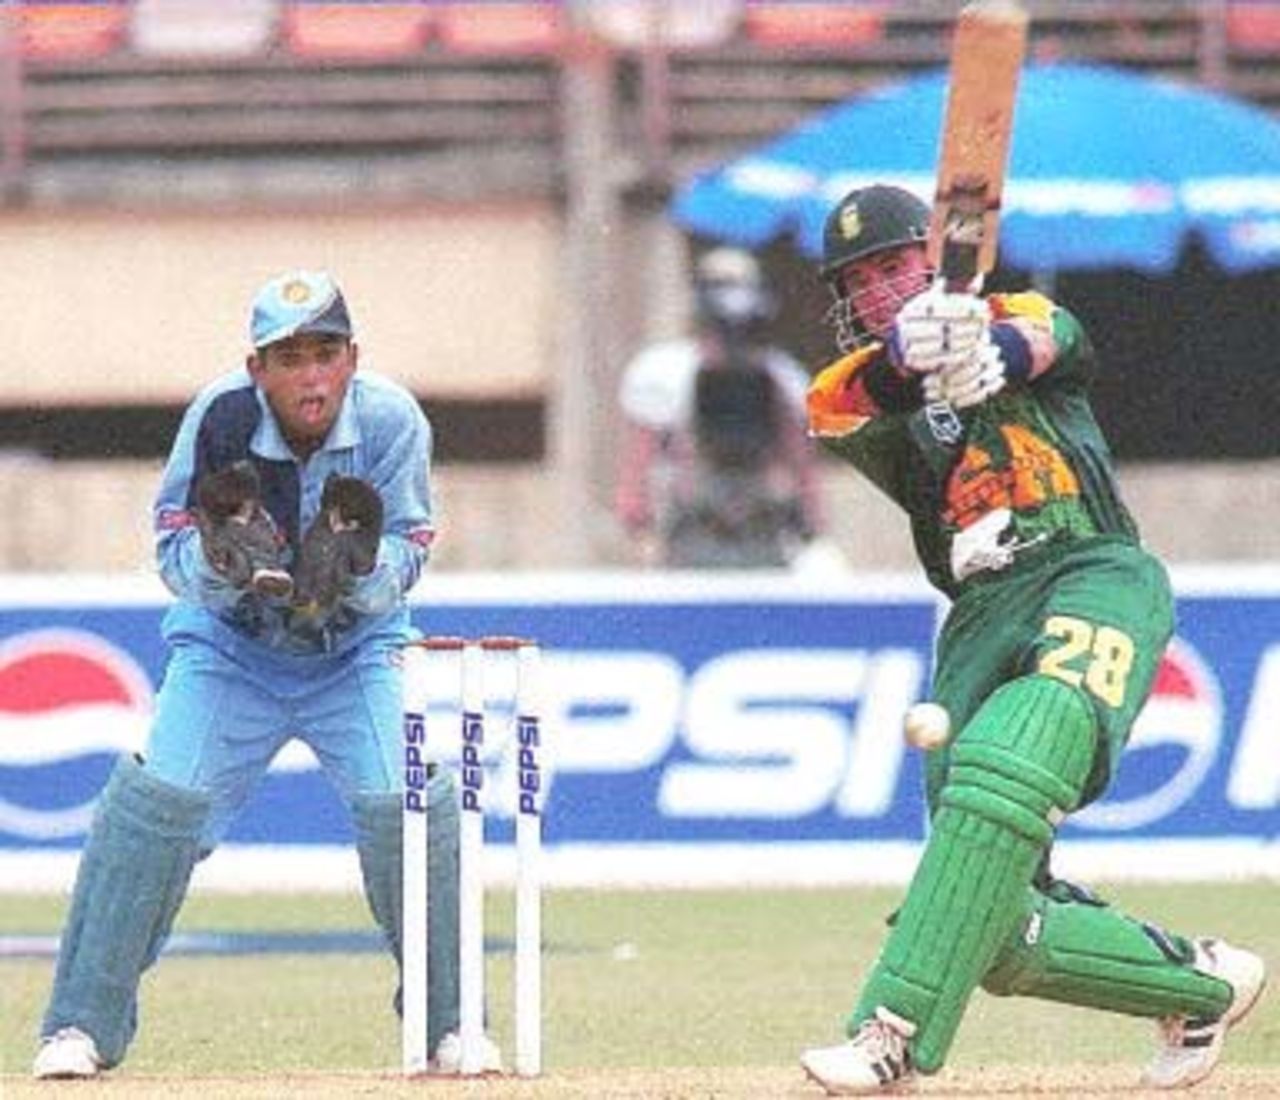 South African batsman Herschelle Gibbs (R) cracks the ball to the boundary on his way to making 111 useful runs ,as Indian wicket keeper Samir Dighe looks on during the first one-day international cricket match between India and South Africa in Cochin 09 March 2000. Despite Gibbs' sparkling century, India went on to beat South Africa by three wickets